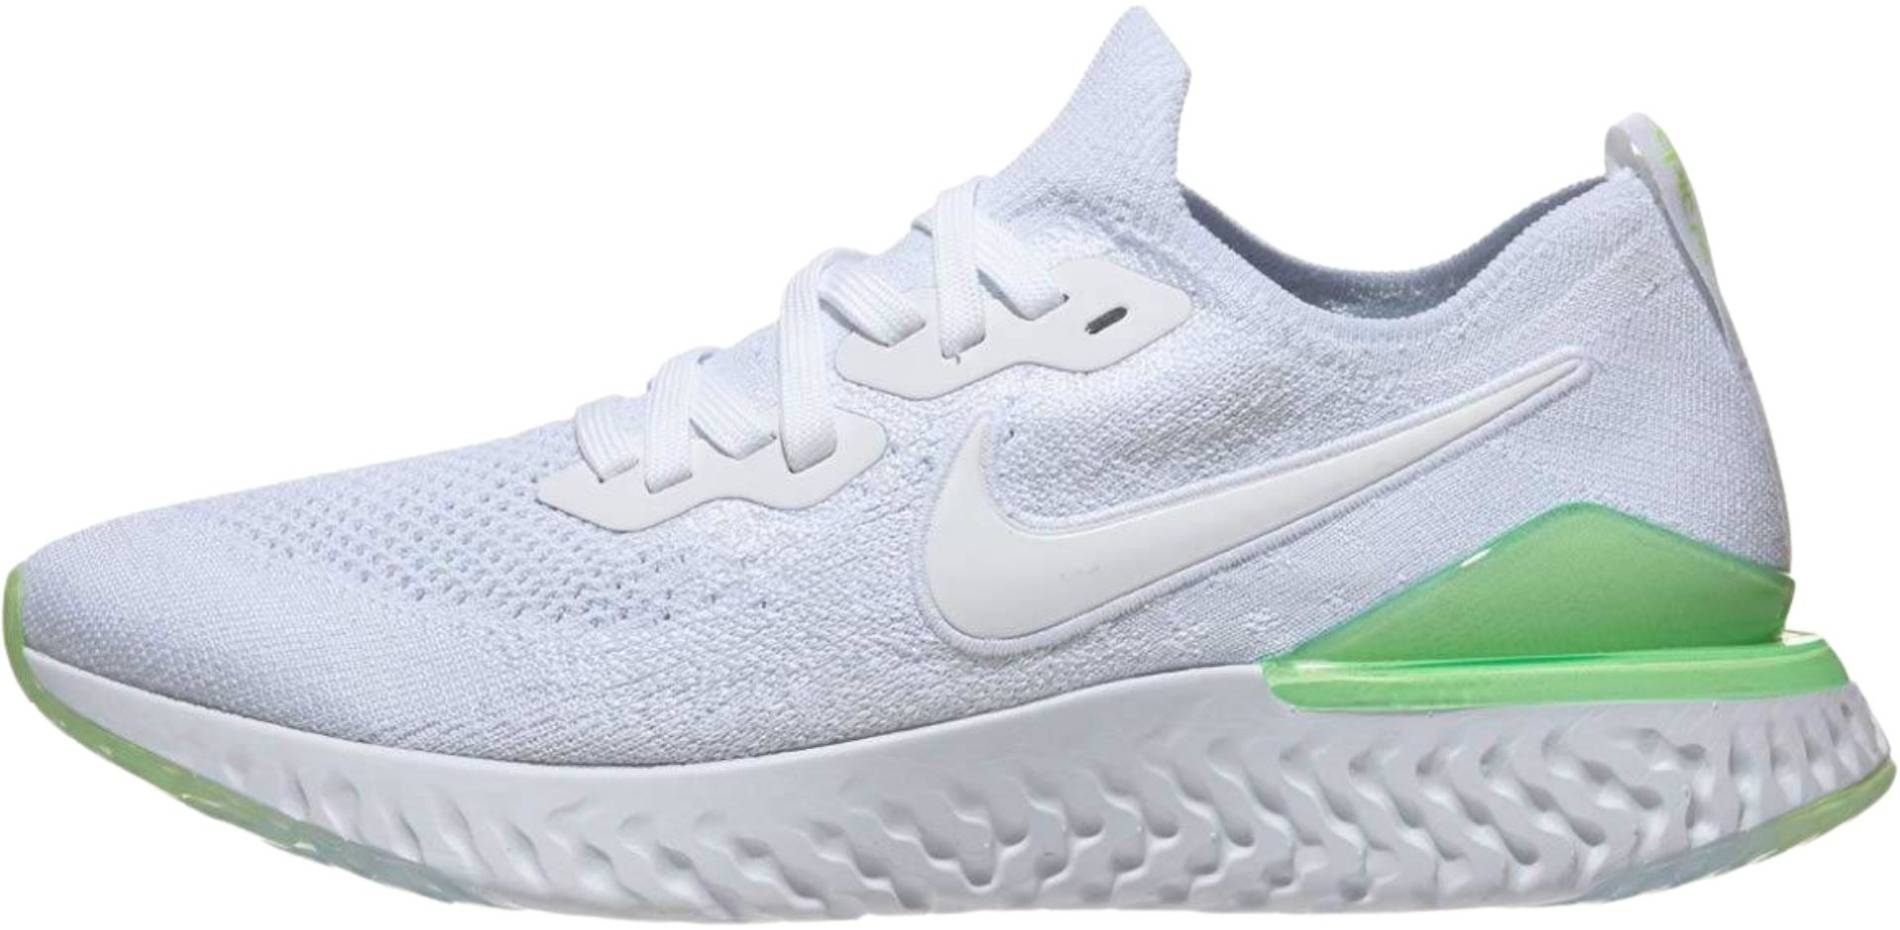 green and white nike running shoes